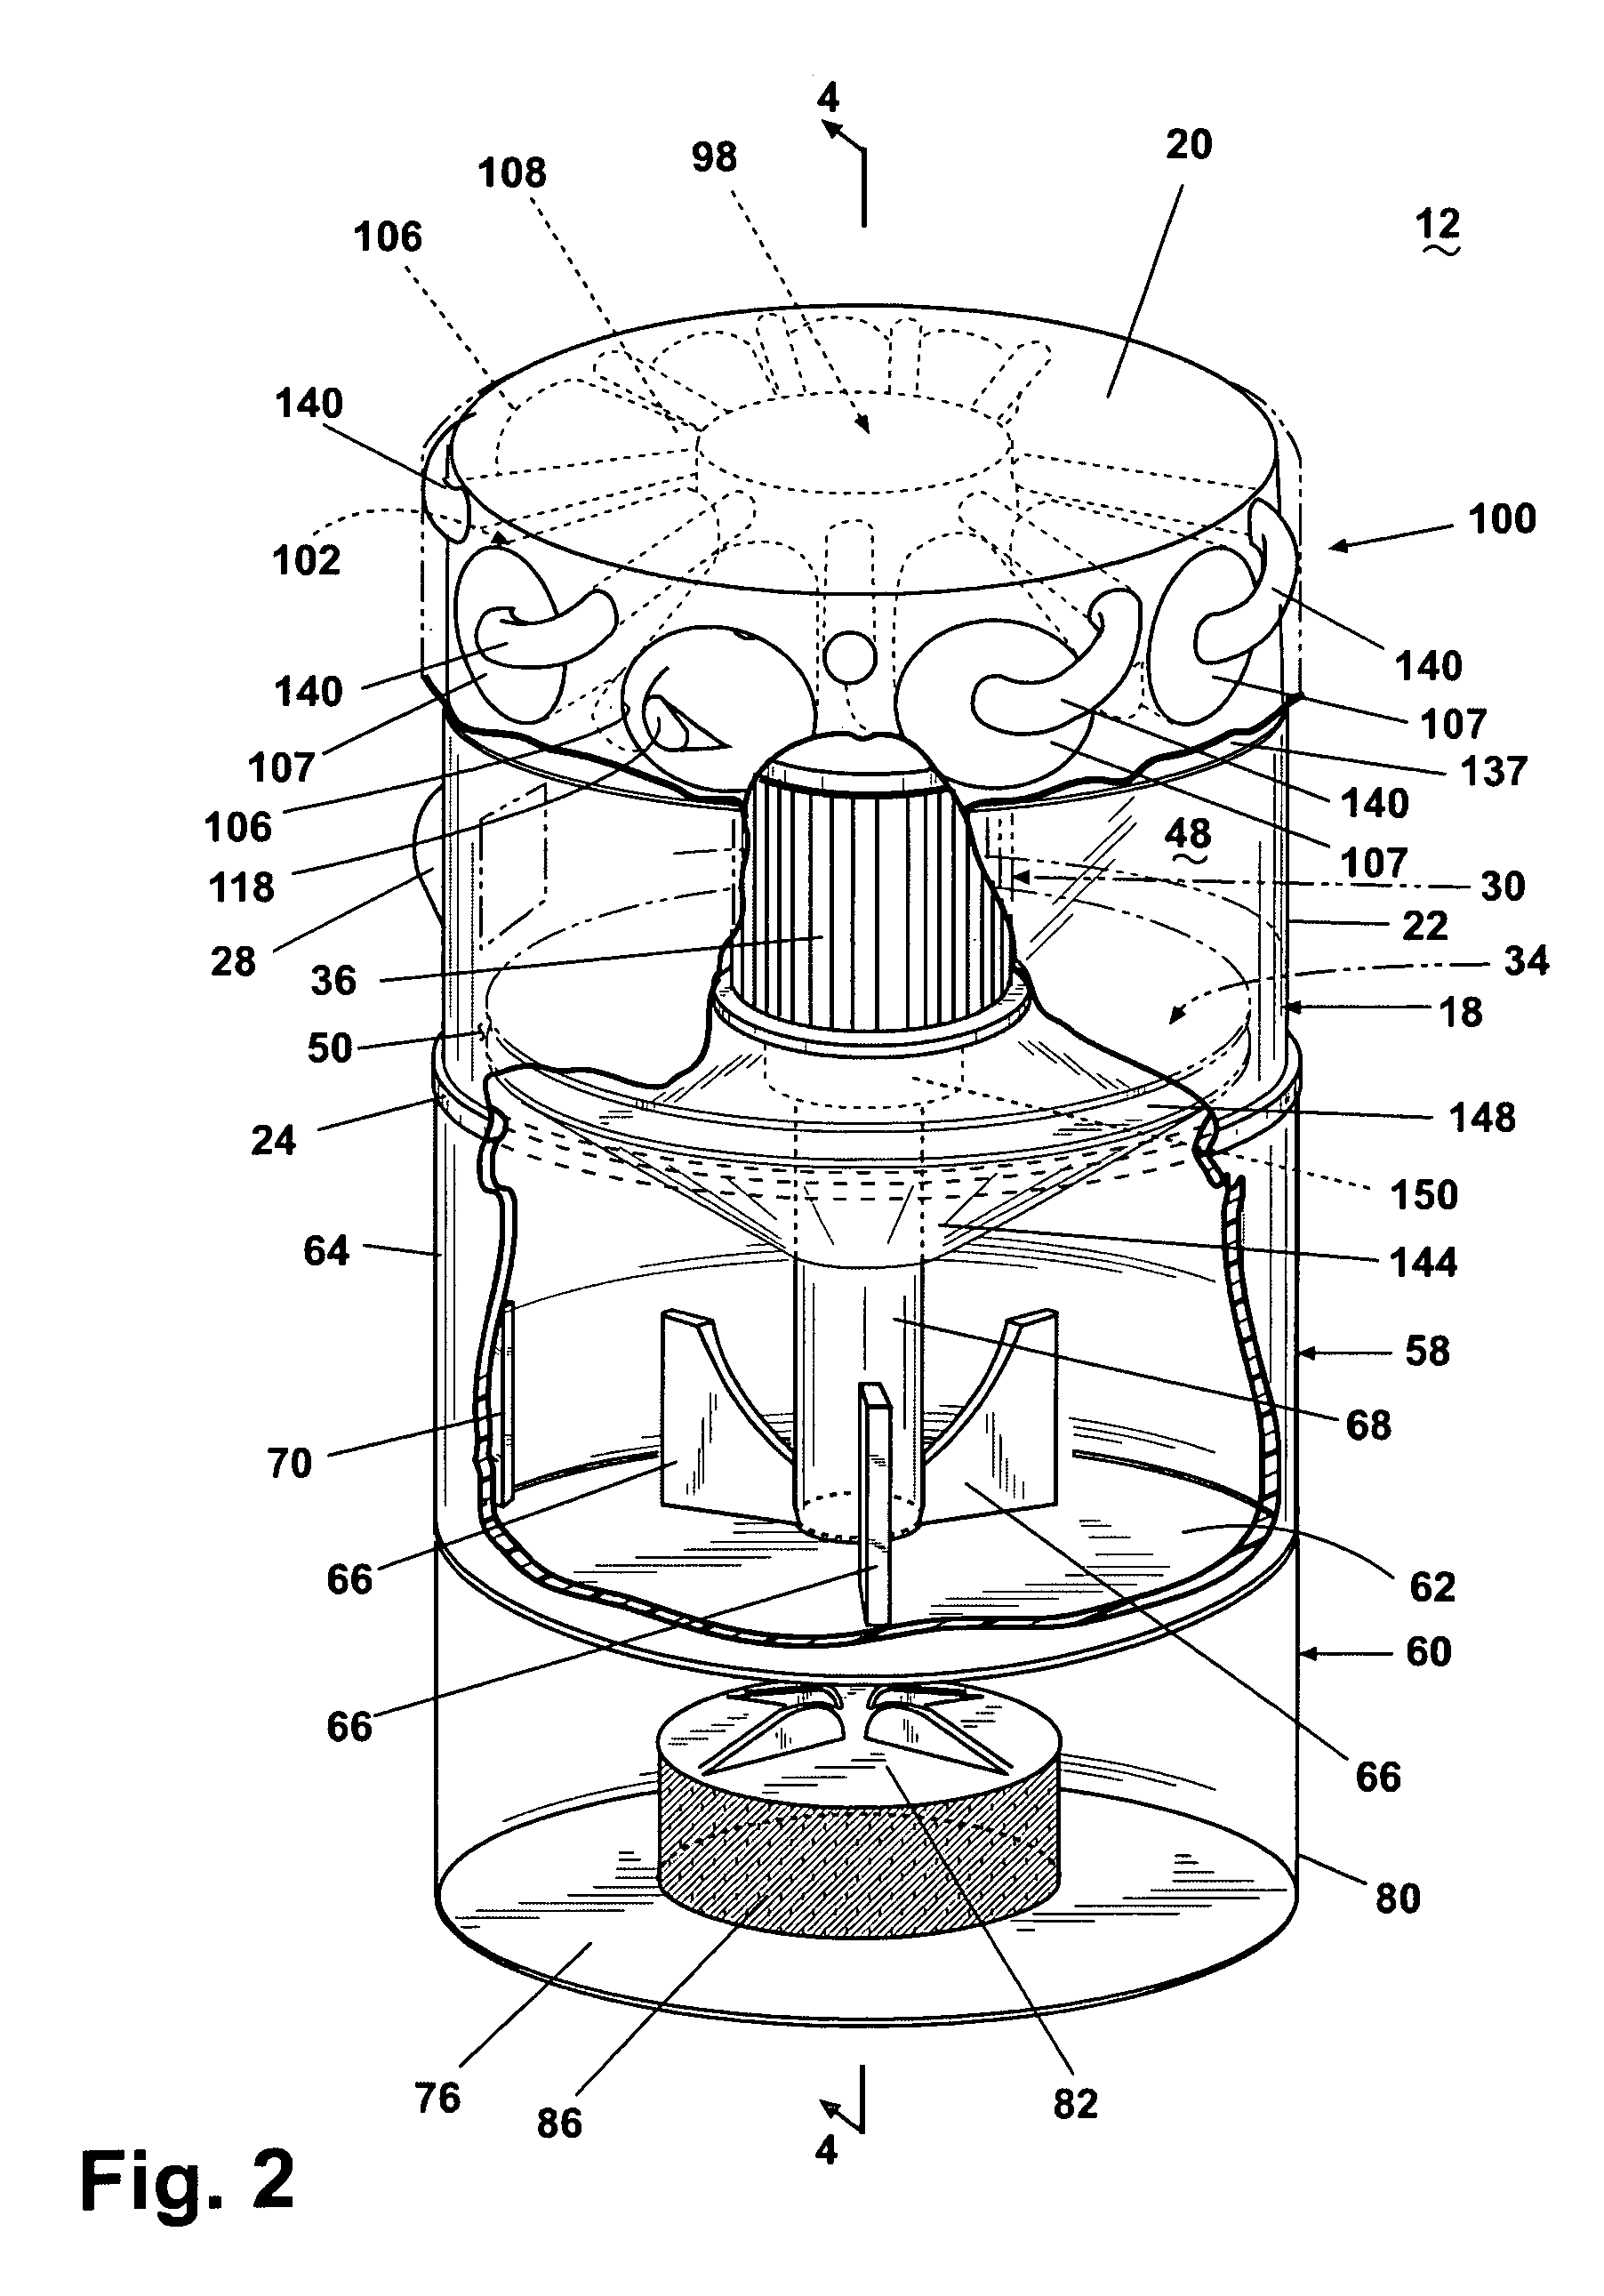 Vacuum cleaner with multiple cyclonic dirt separators and bottom discharge dirt cup